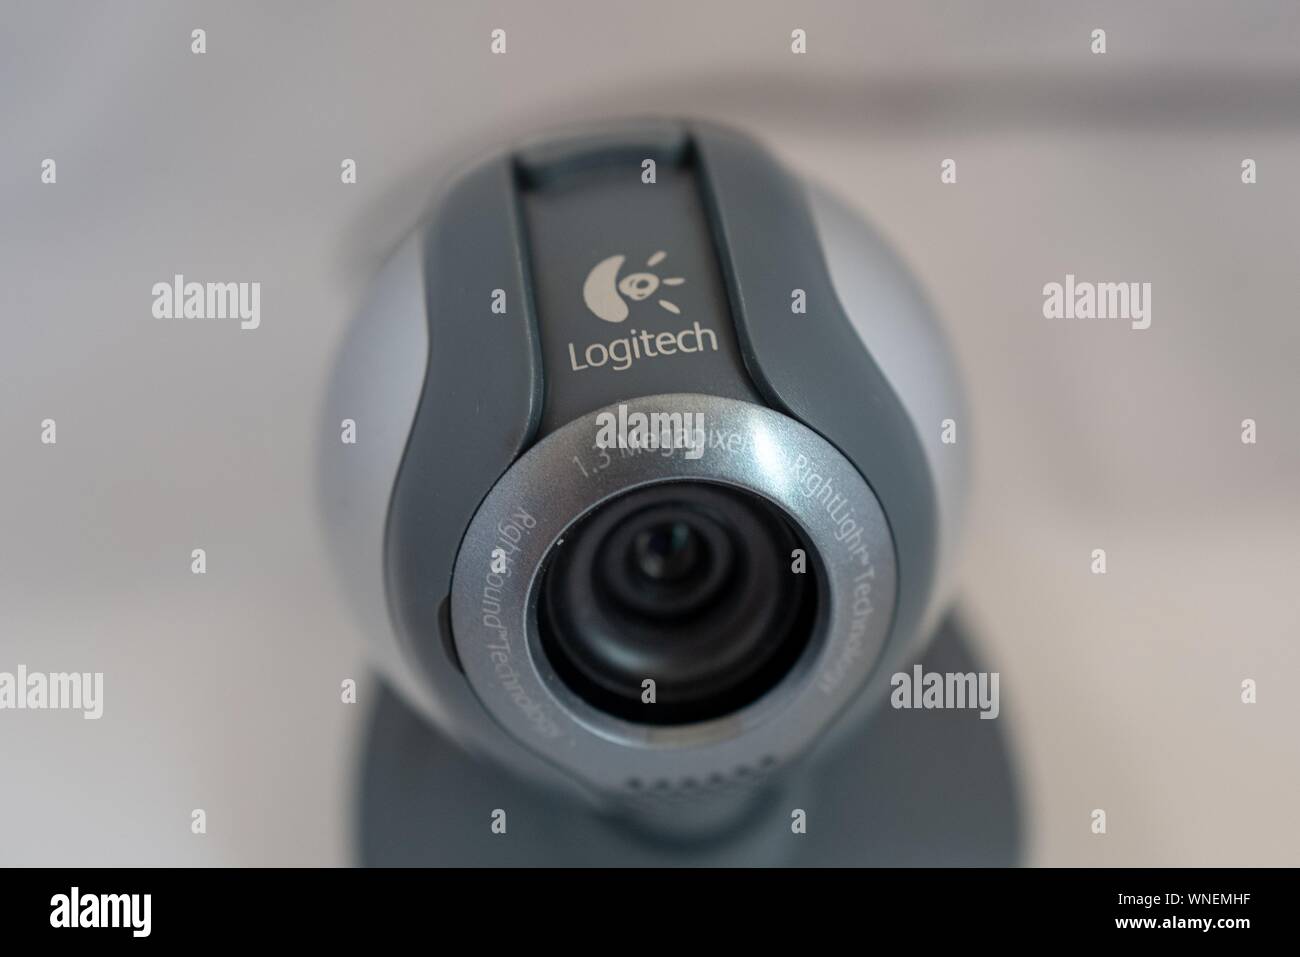 Close-up of Logitech consumer computer webcam, ca 2004, in gray color with  lens visible on white background, August 29, 2019 Stock Photo - Alamy